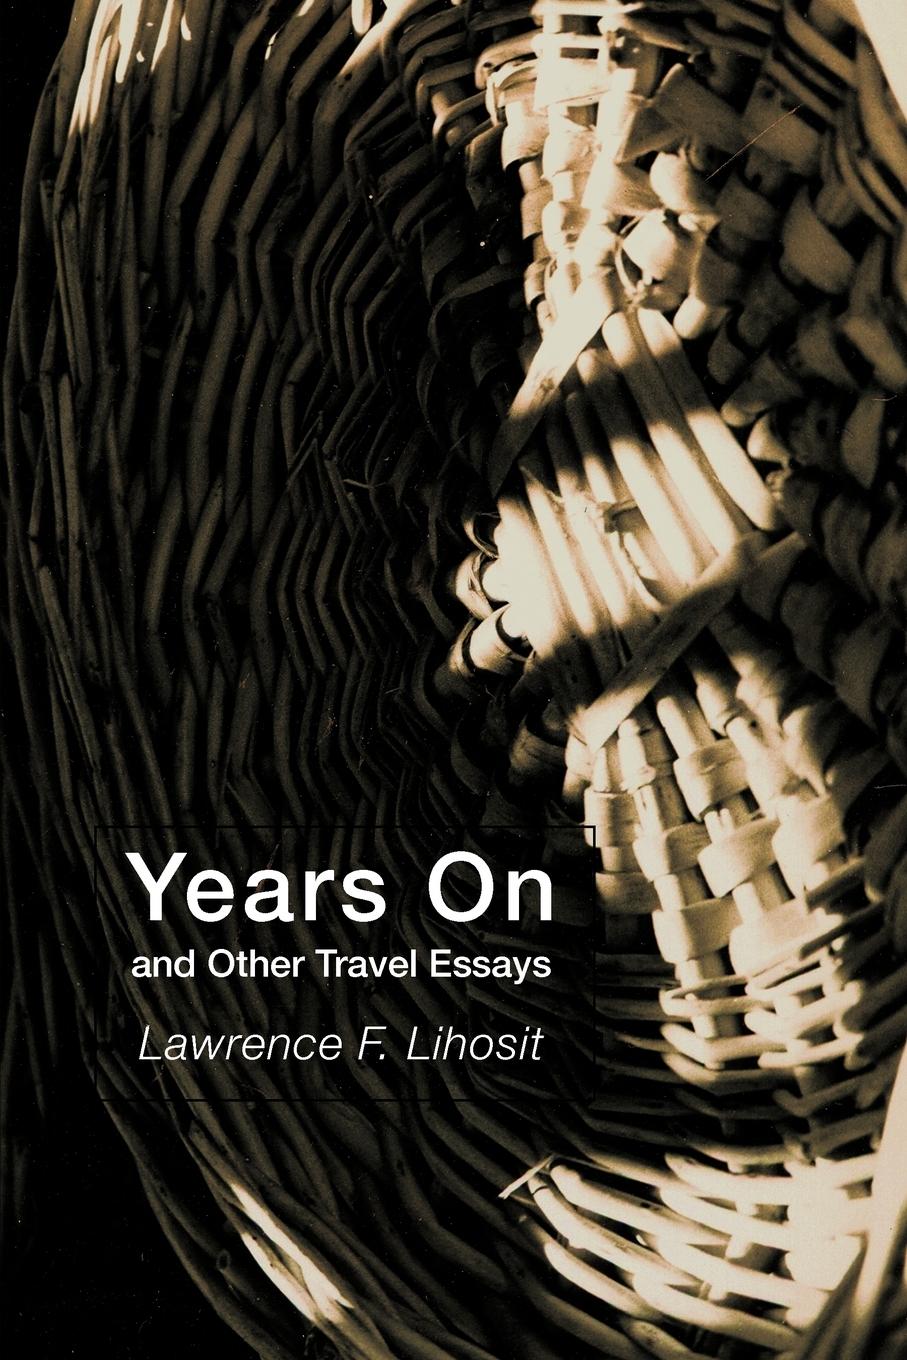 Years on and Other Travel Essays - Lihosit, Lawrence F.